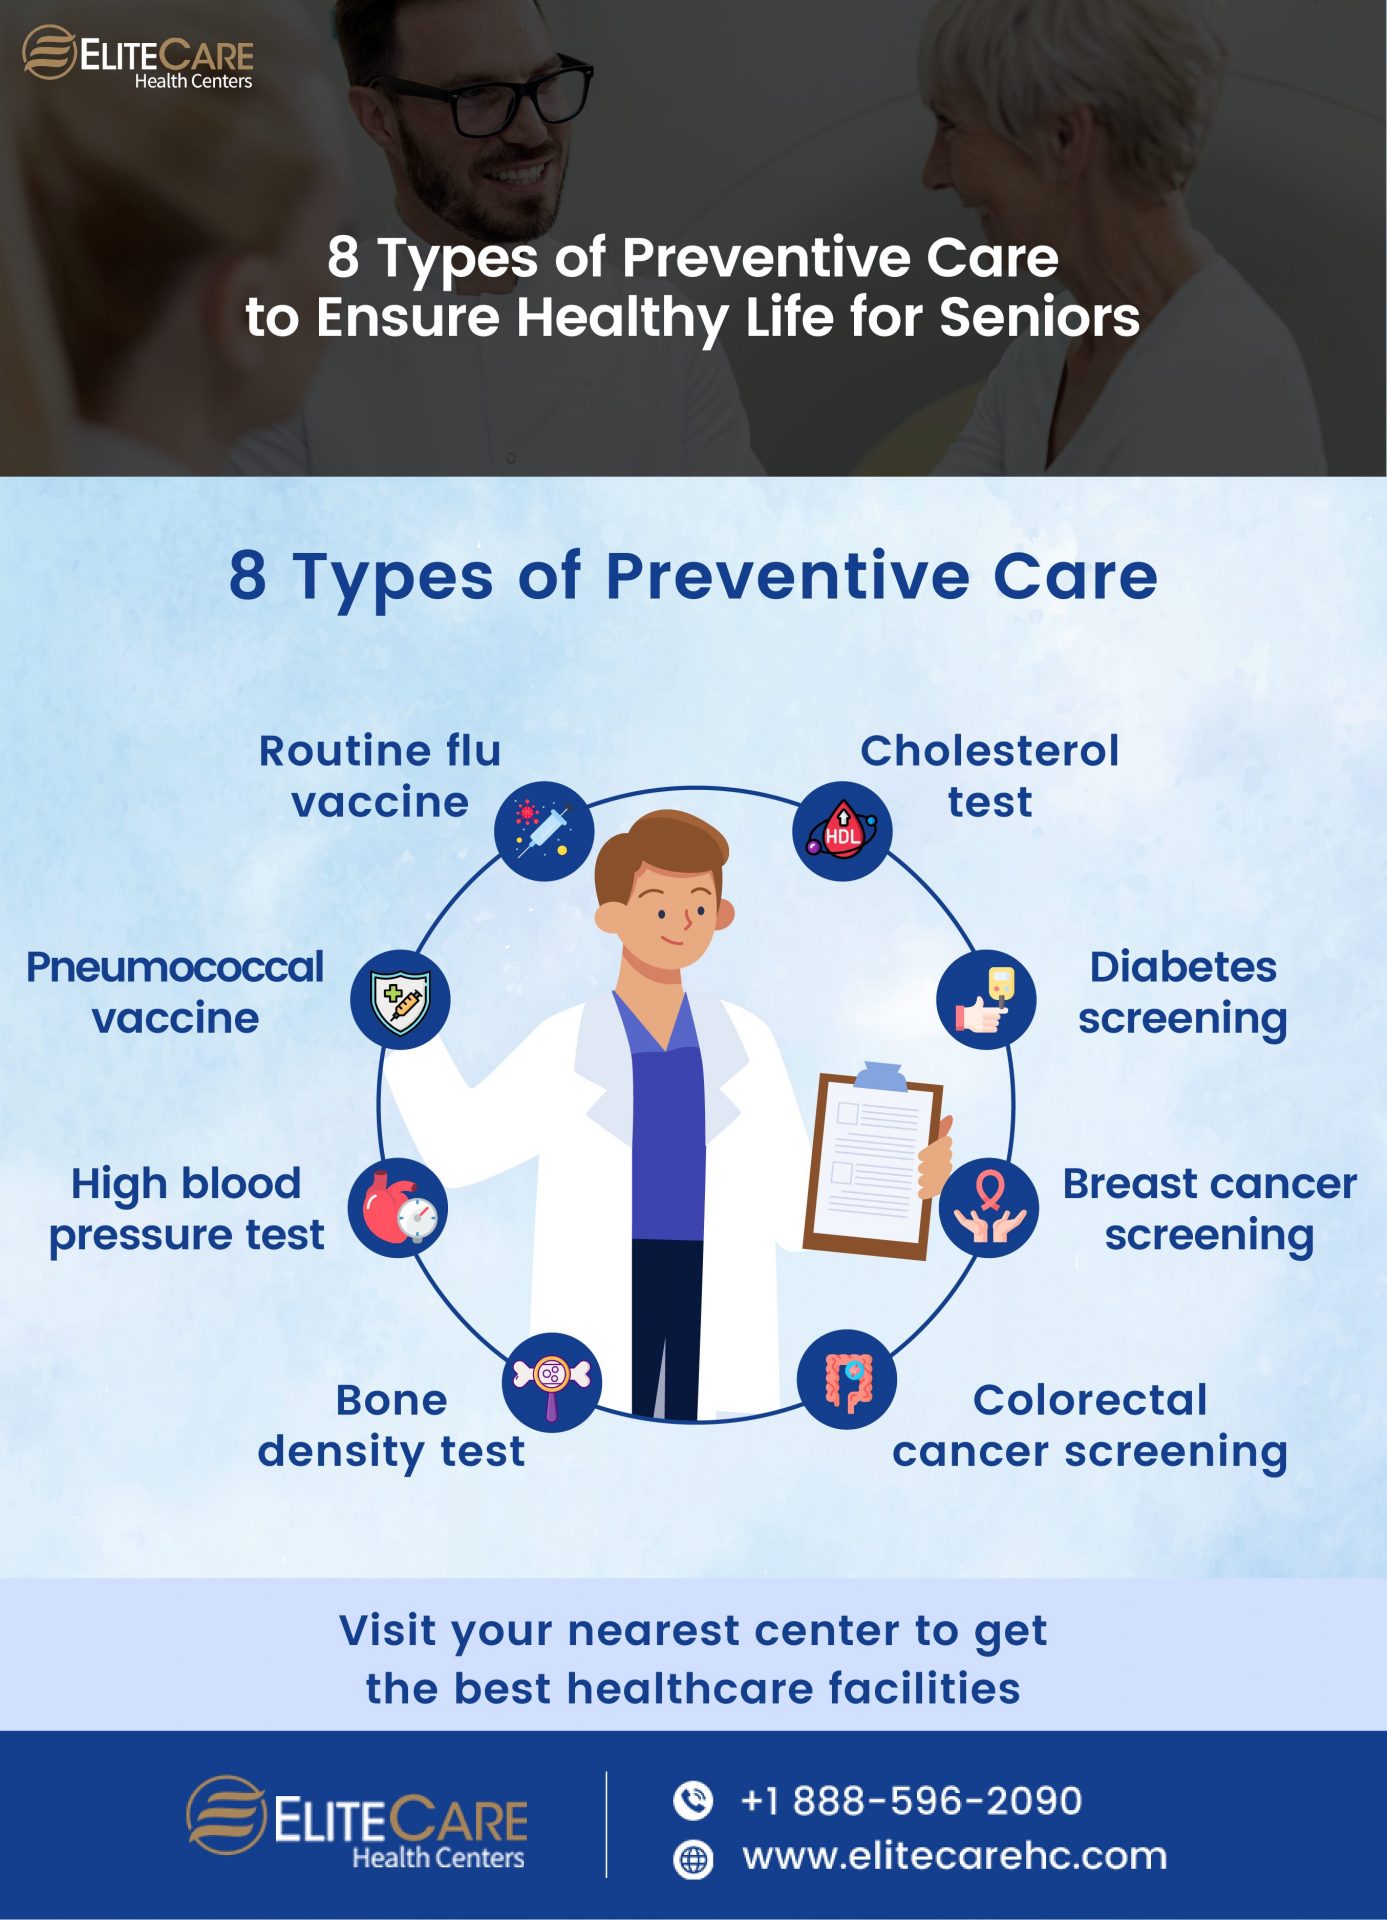 8 Types Preventive Care to Ensure Healthy life for Seniors | Infographic